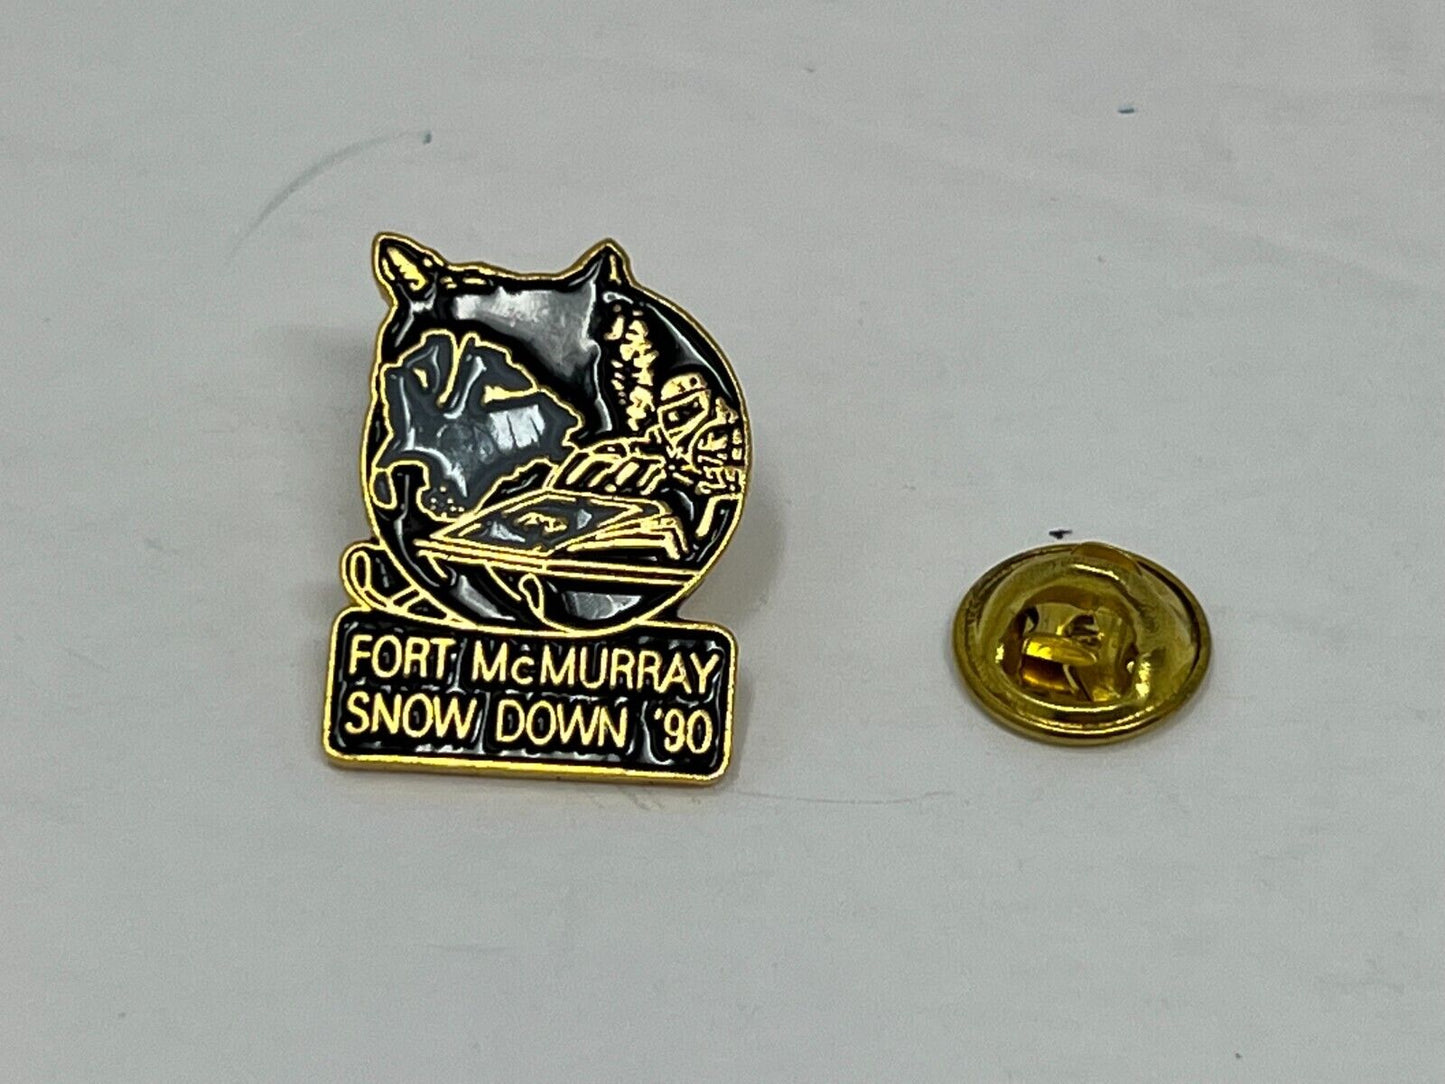 Fort McMurray Snow Down '90 Event Lapel Pin P2